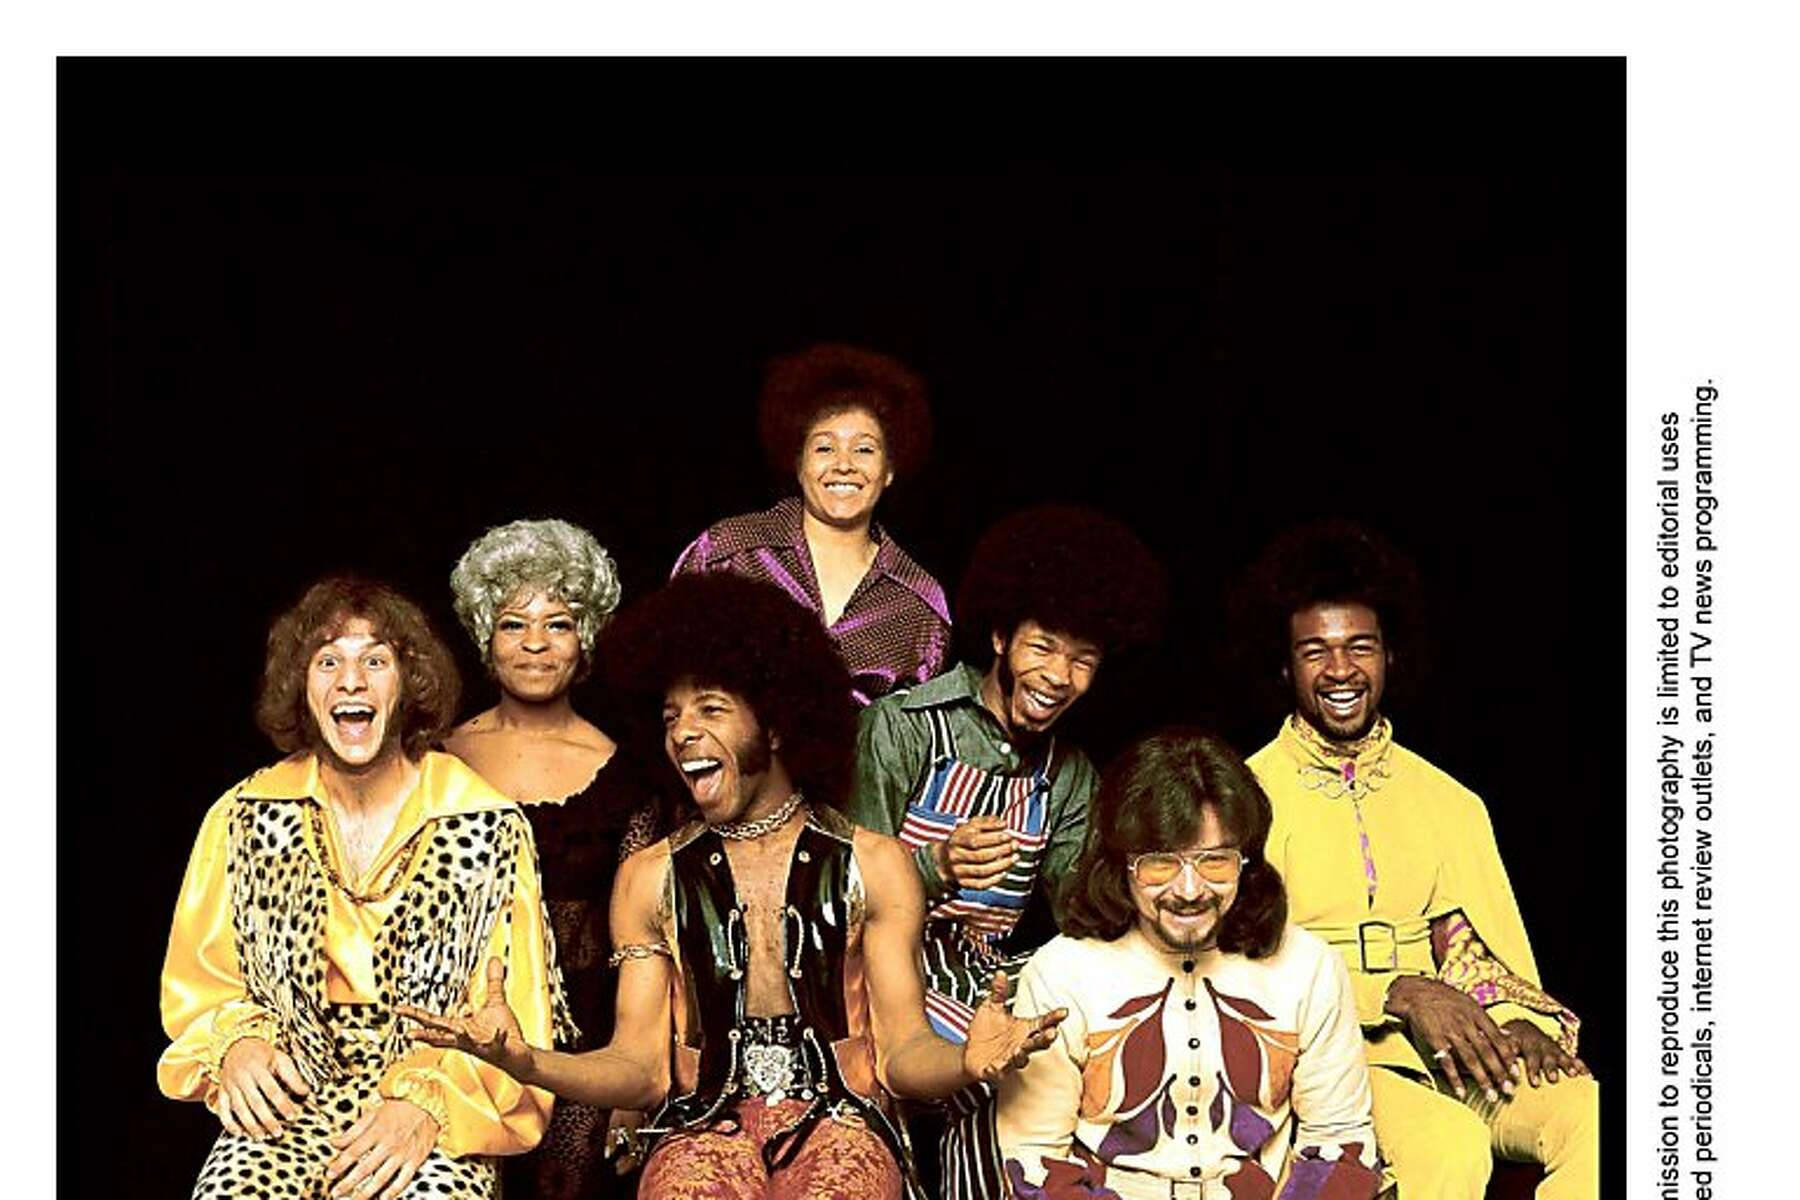 Sly And The Family Stone Members Shoot Wallpaper